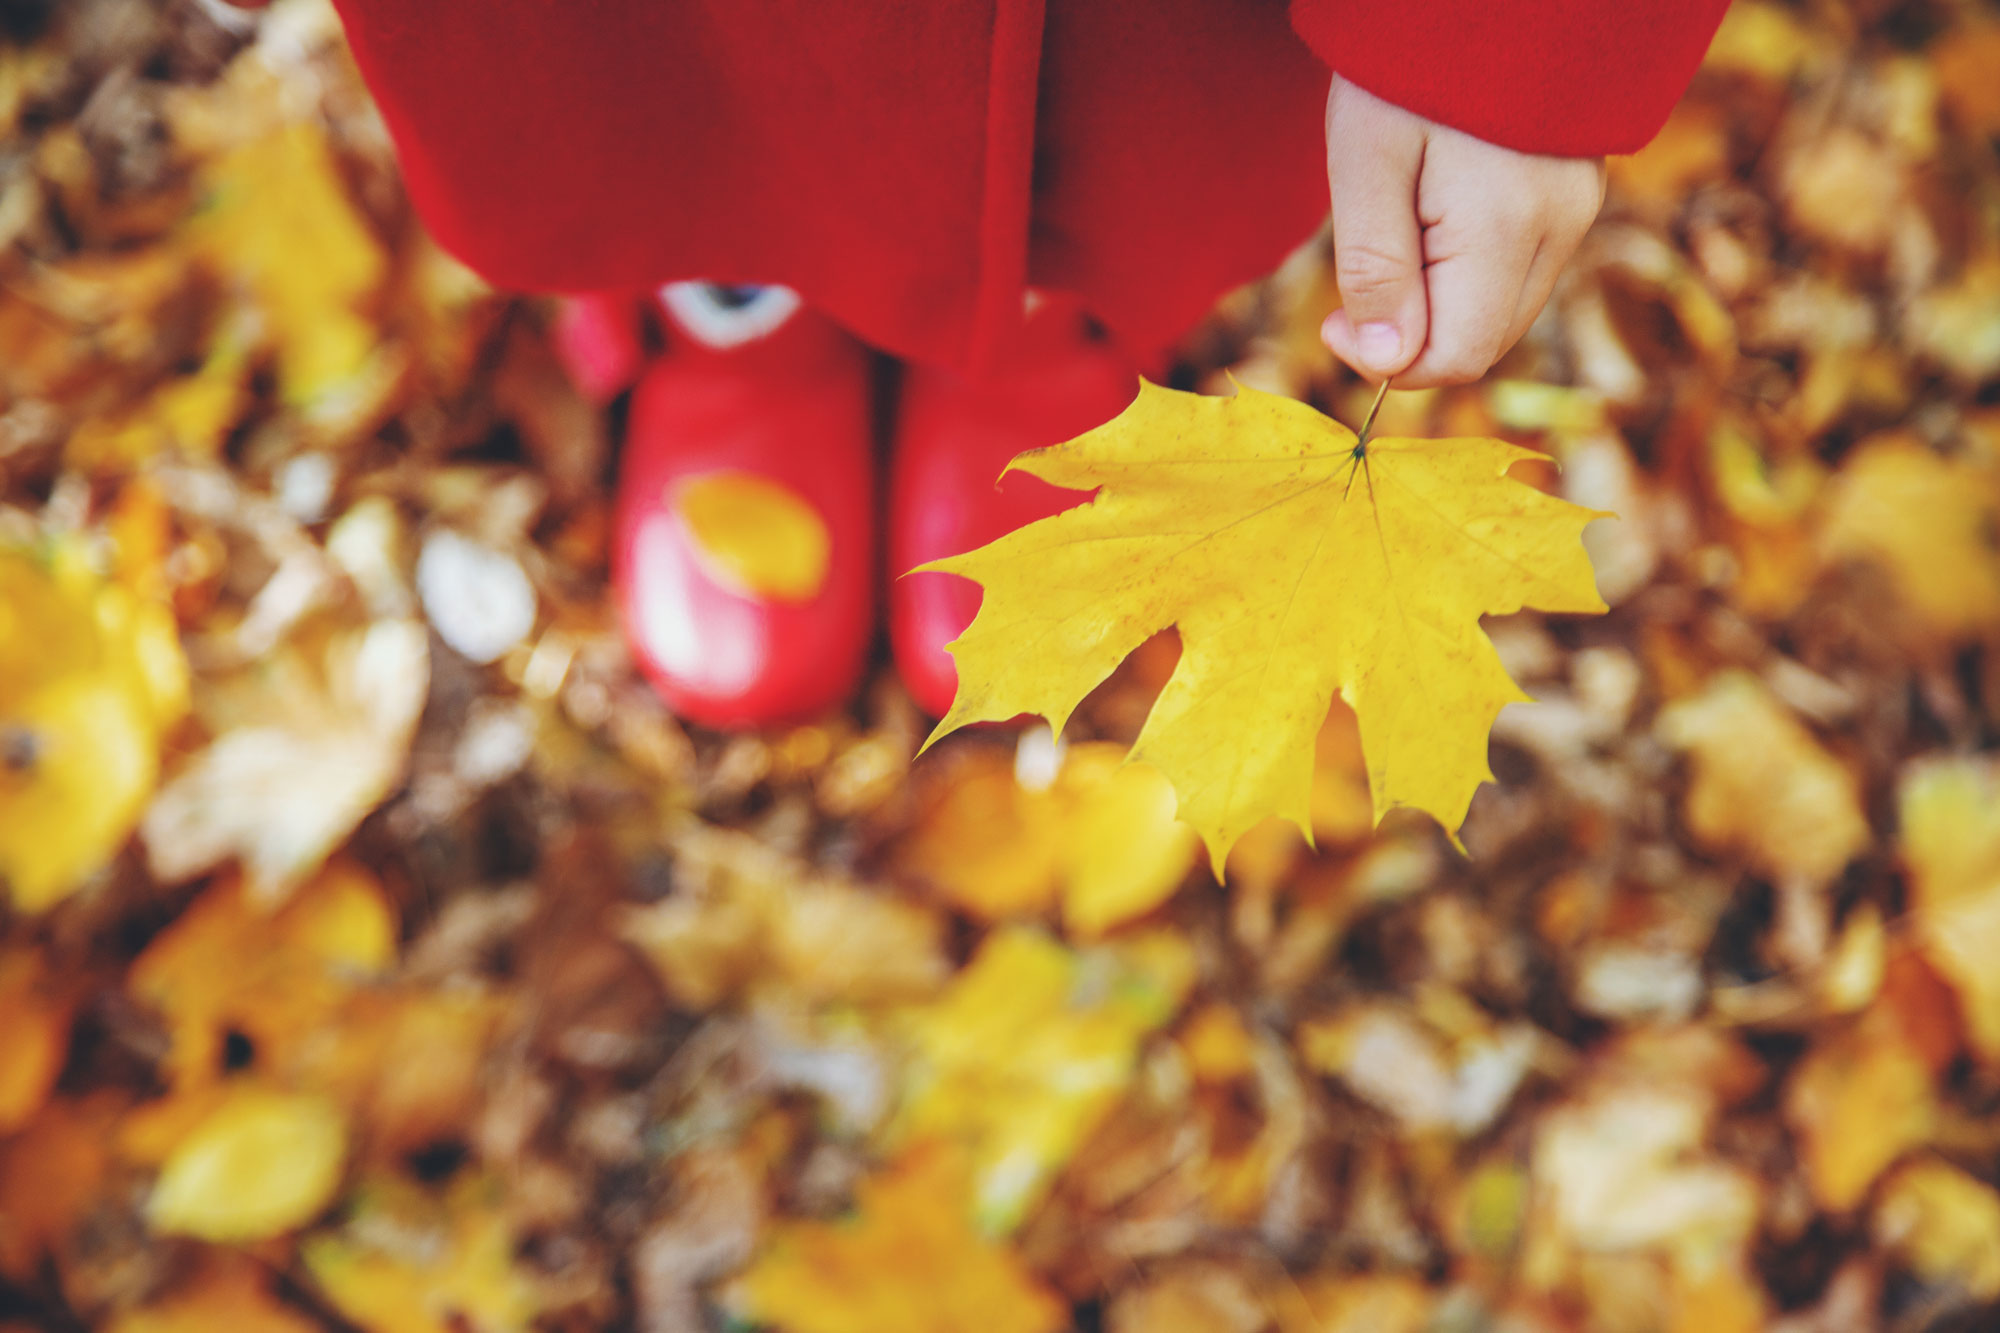 Photo of a young girl wearing red boots and red jacket, holding a leave while standing on a pile of leaves